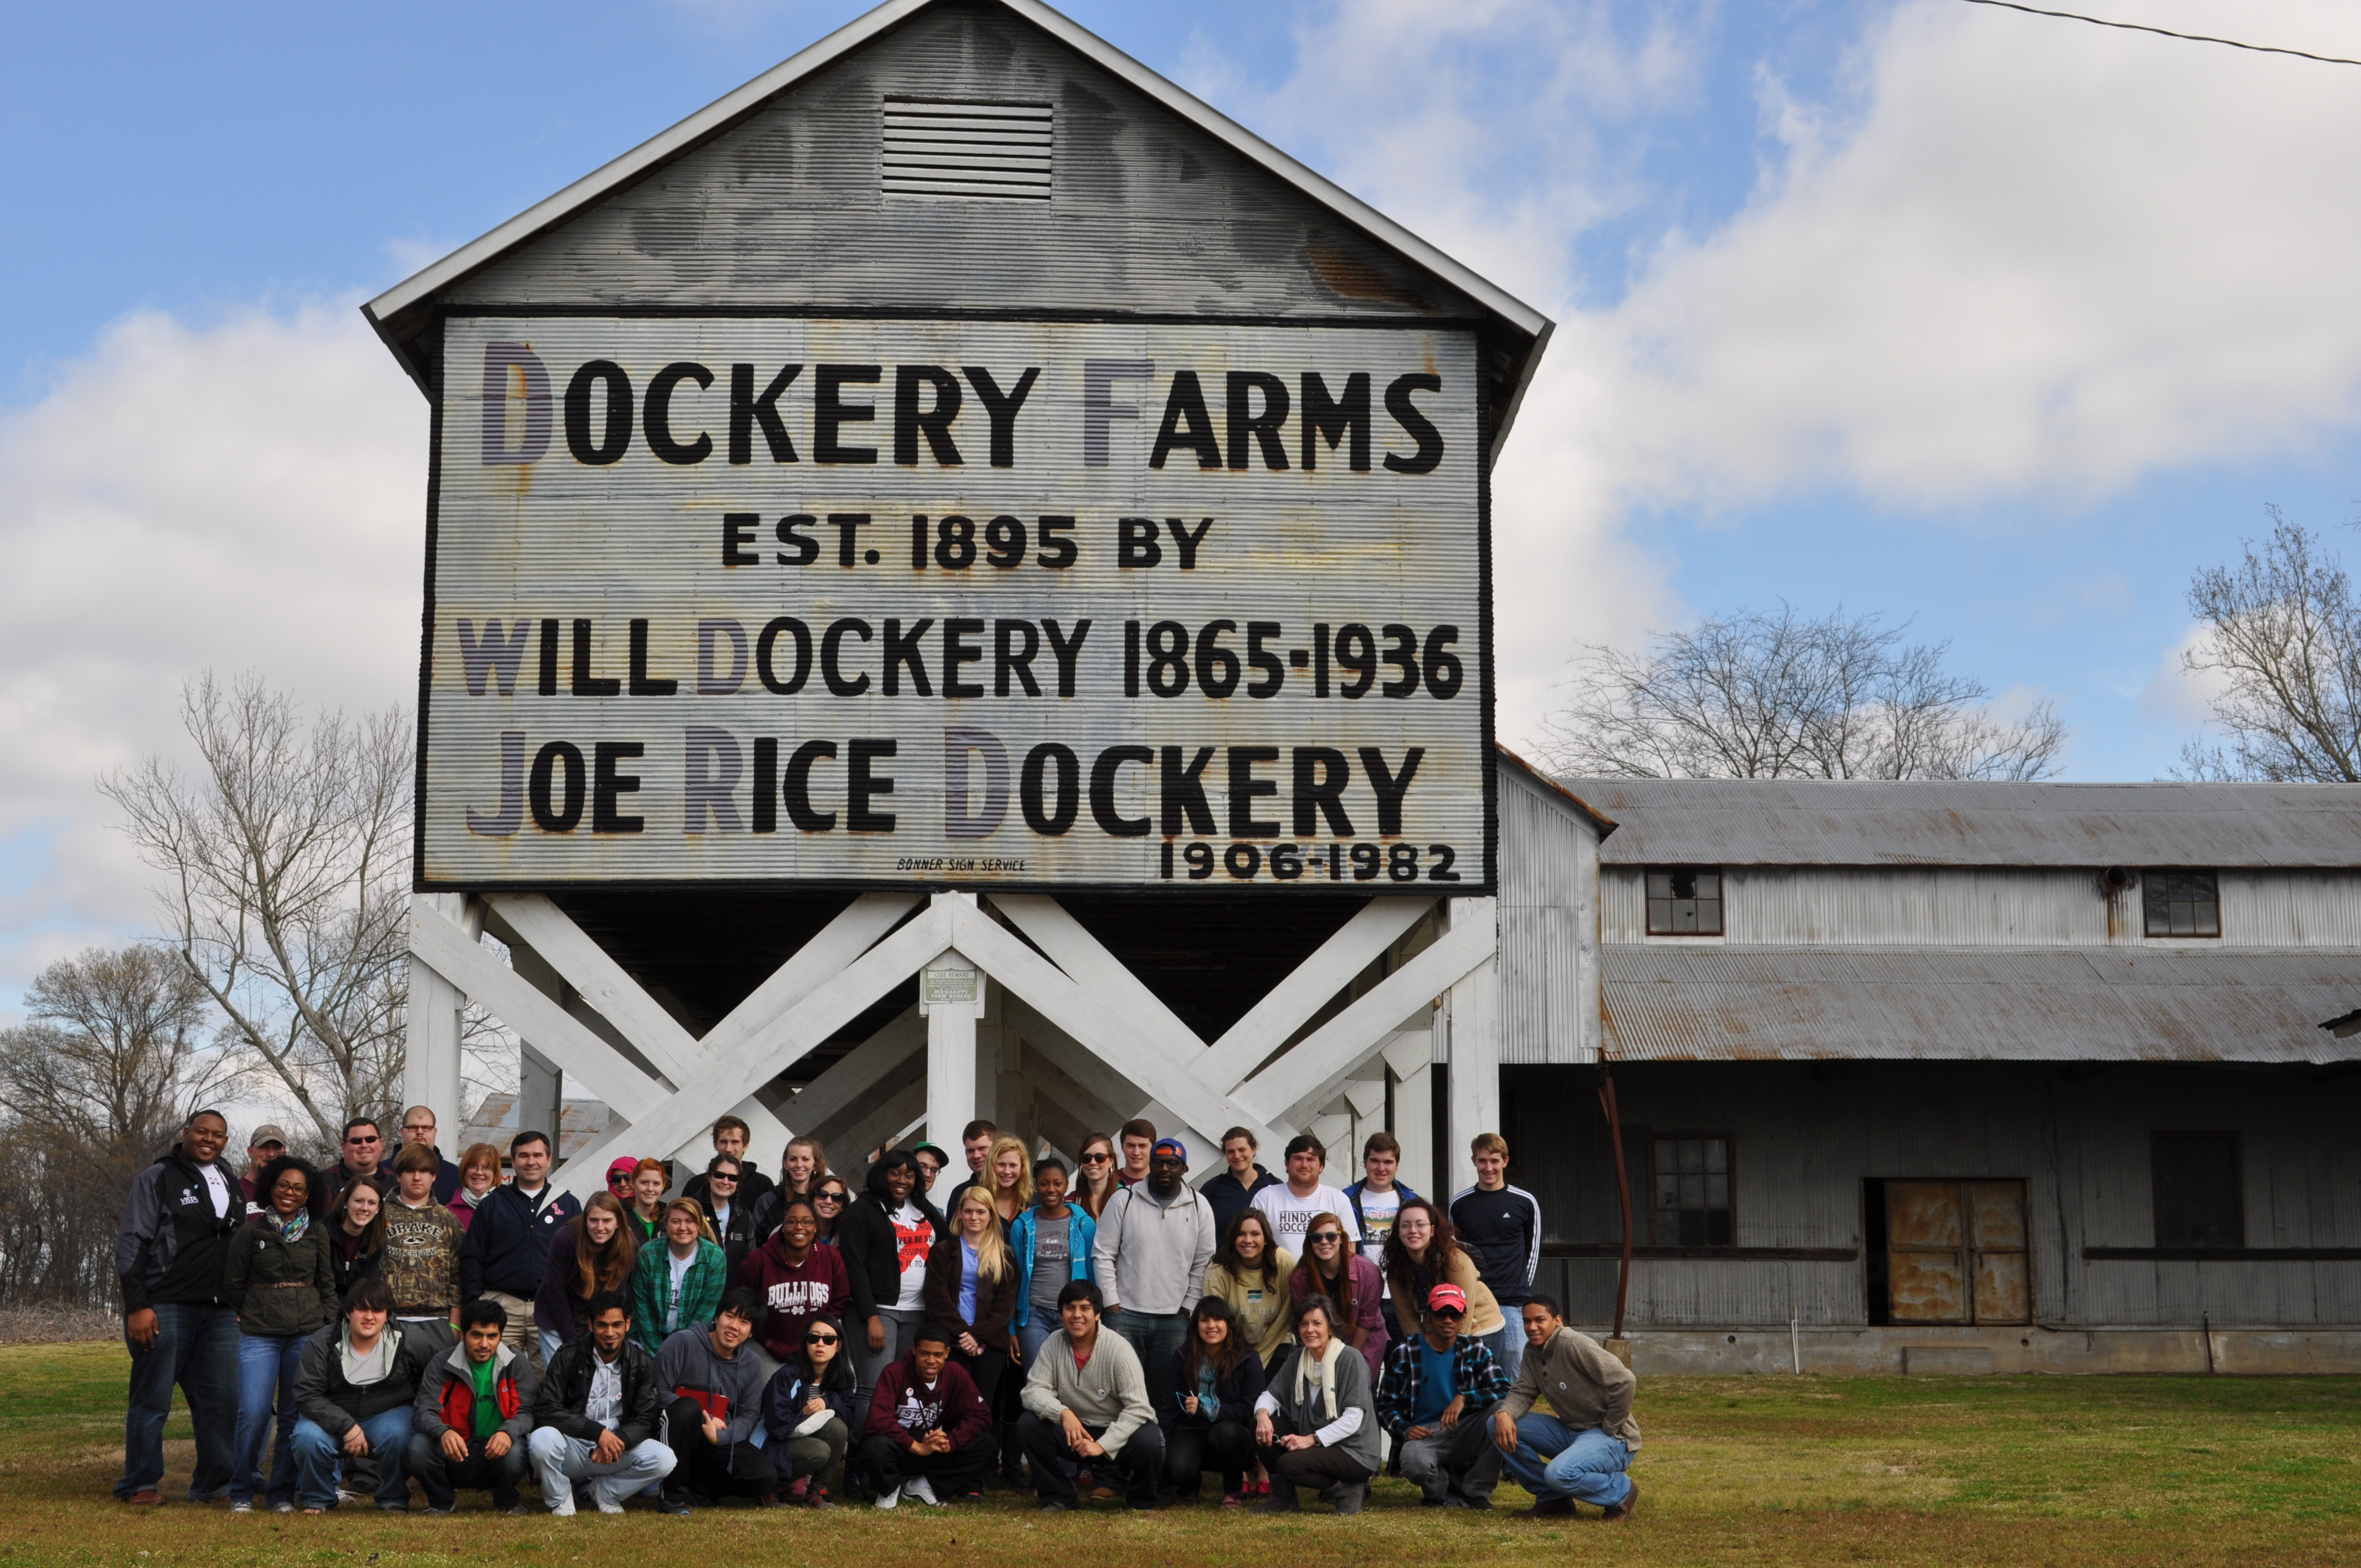 PHOTO:  The combined classes from Mississippi State University and the University of Mississippi at Dockery Farms.  Photo by Cade Smith, Student Leadership and Community Engagement Director at Mississippi State University.  